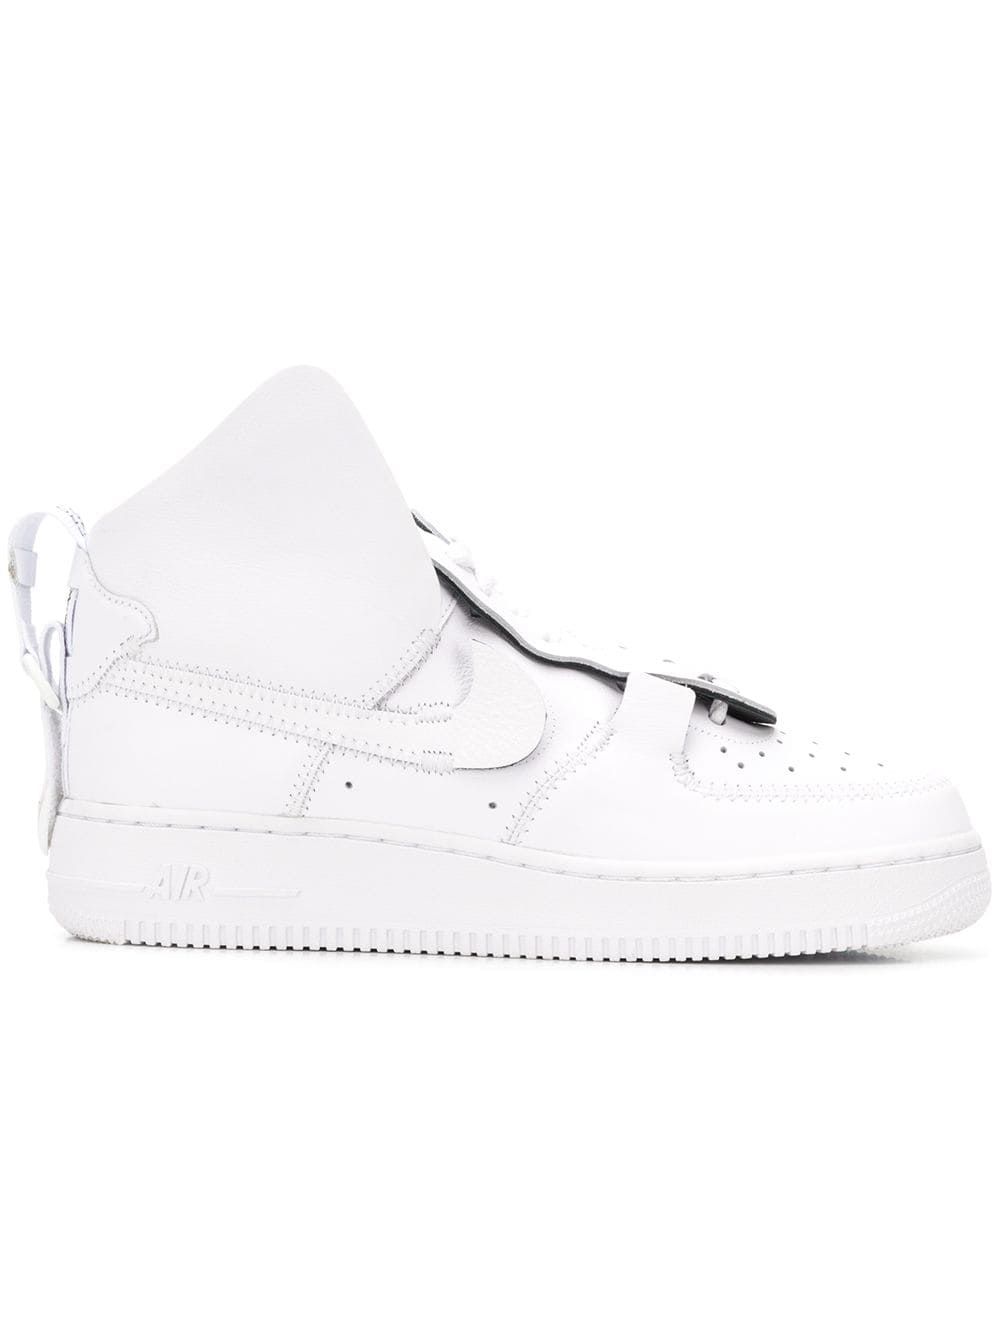 Air Force 1 High PSNY sneakers